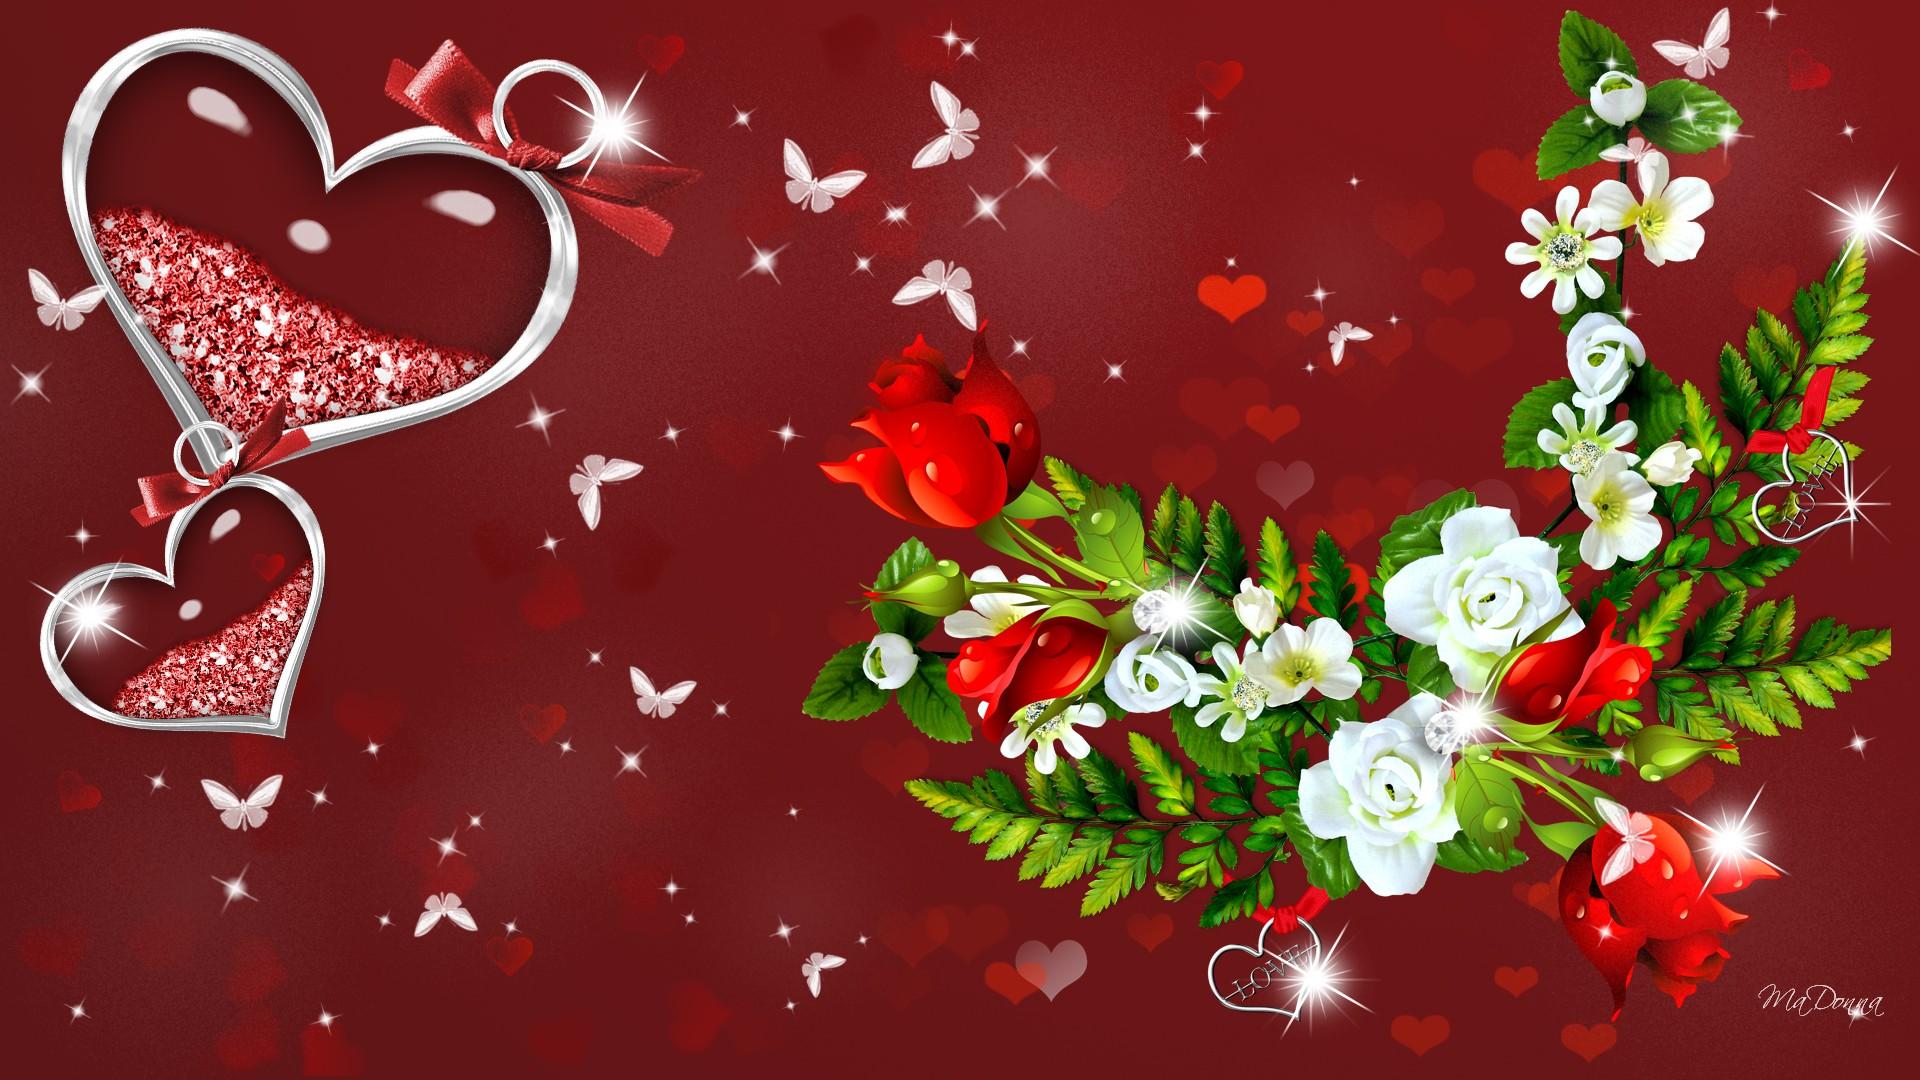 Valentine Roses wallpaper | 3d and abstract | Wallpaper Better